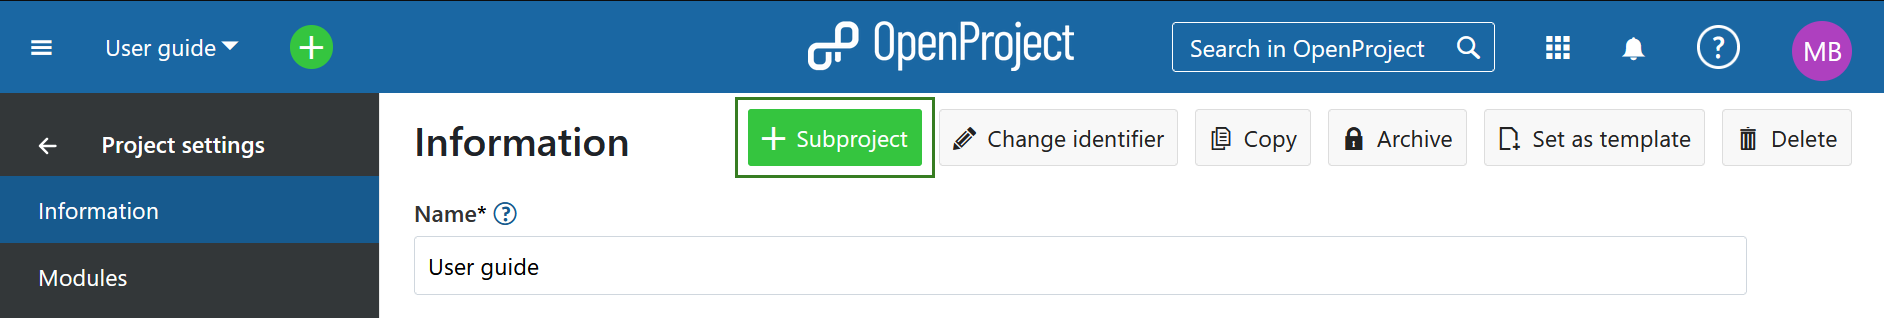 project settings subproject